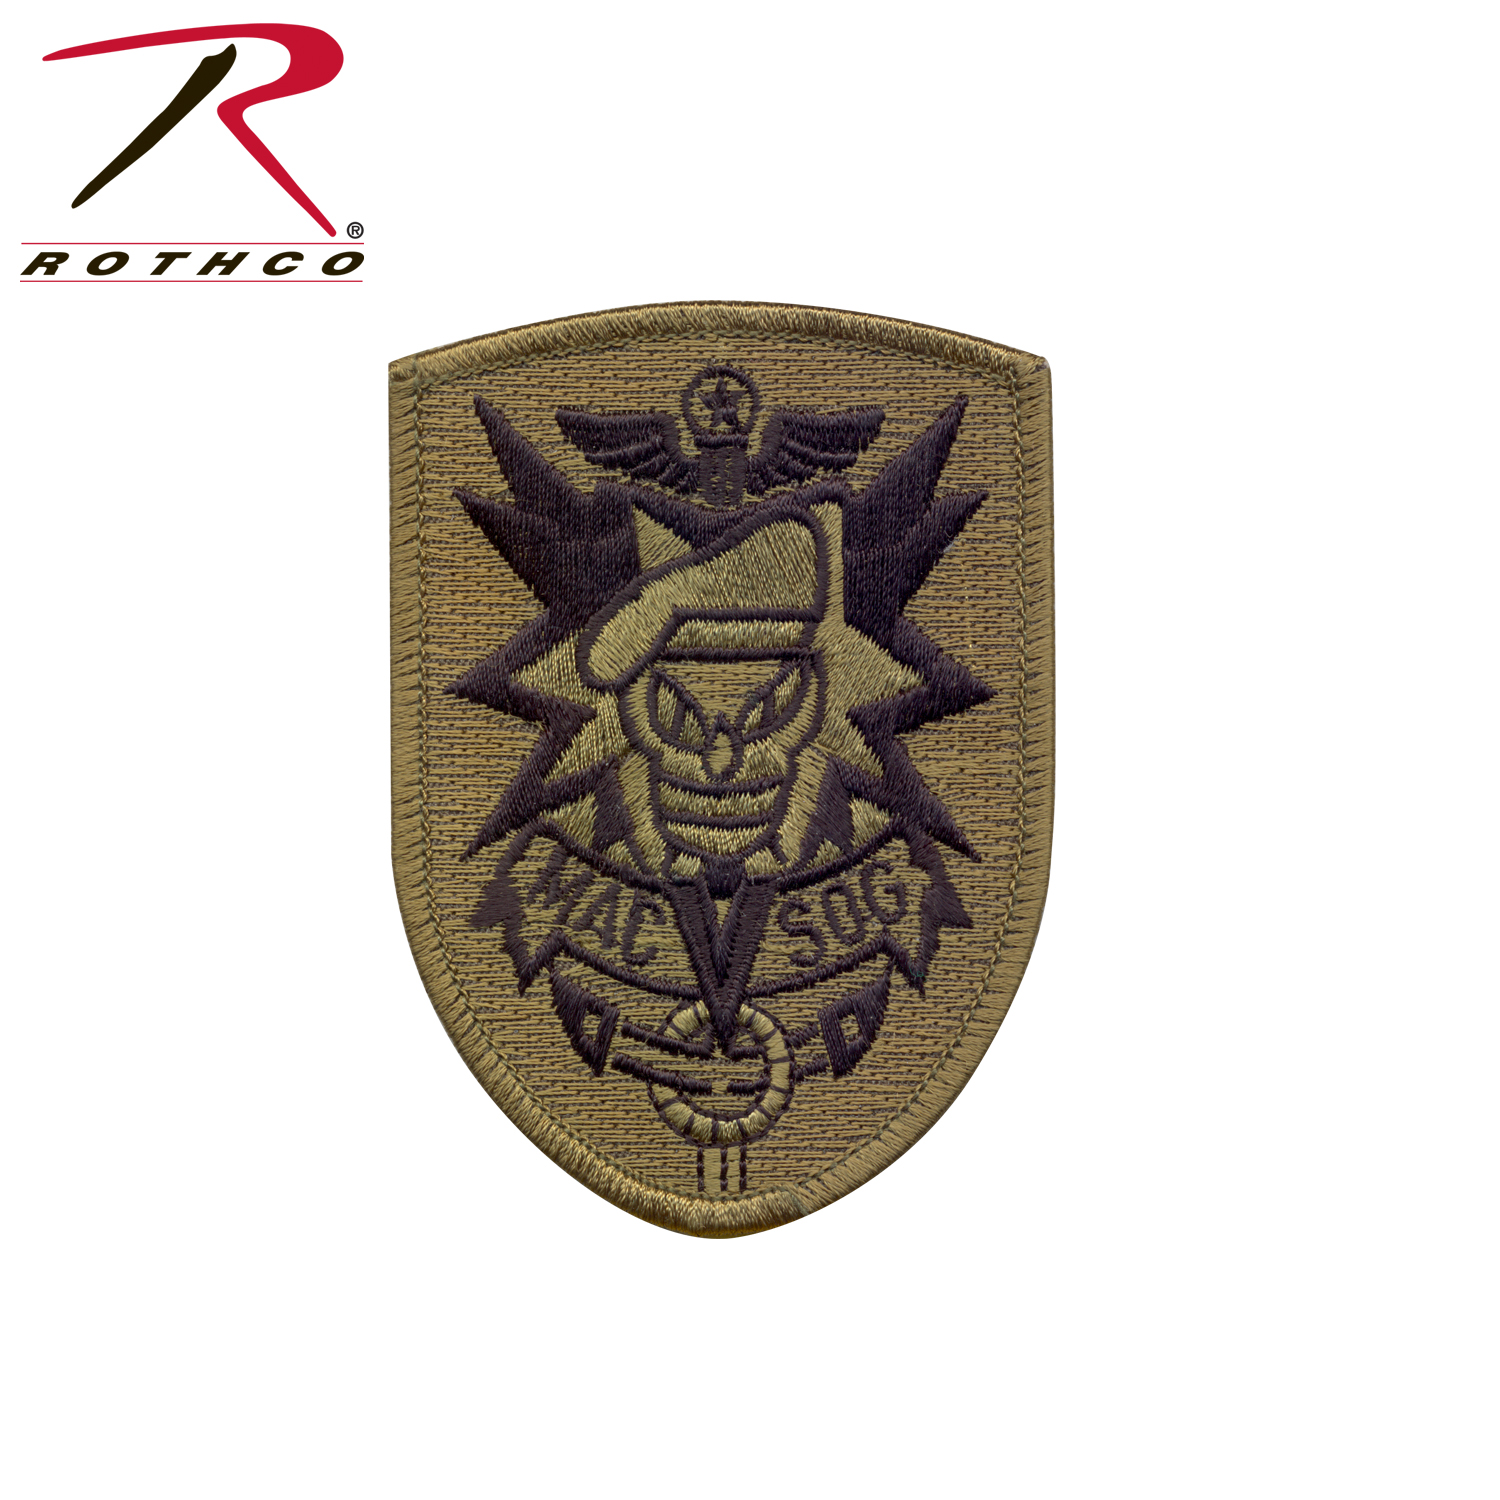 Rothco Subdued MAC VIET-SOG Patch